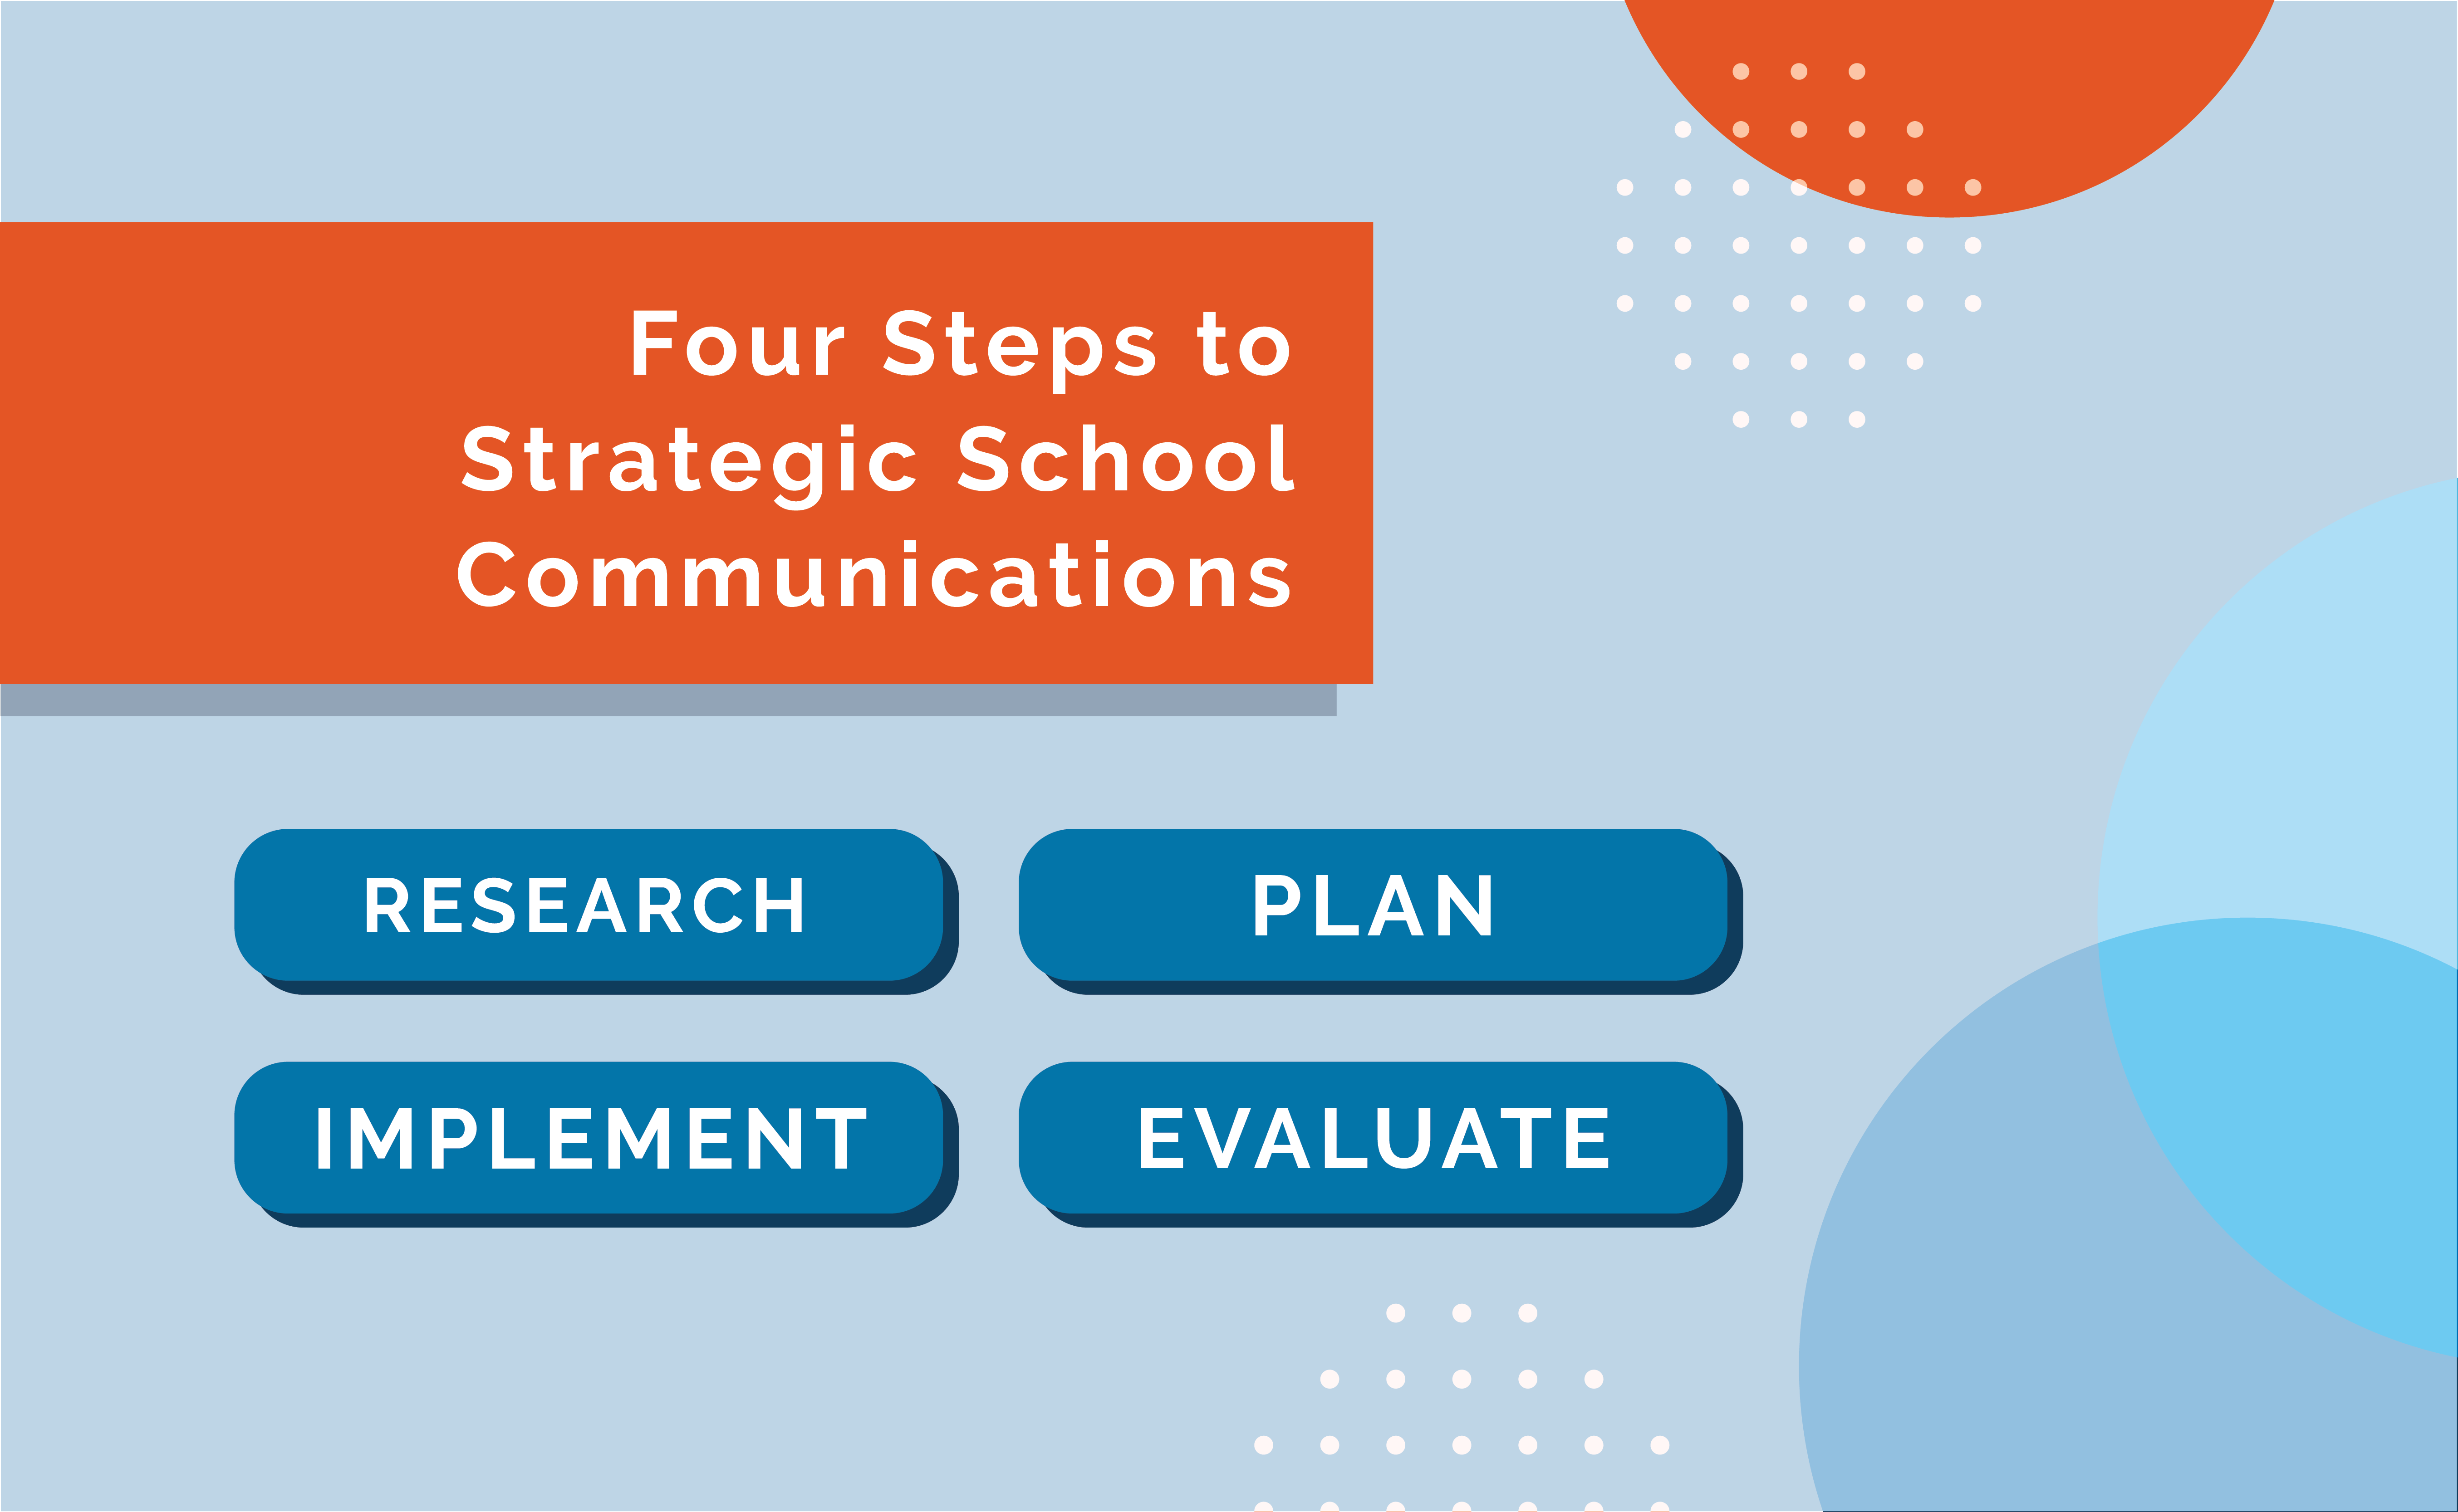 Four steps to strategic school communications: Research, Plan, Implement, Evaluate